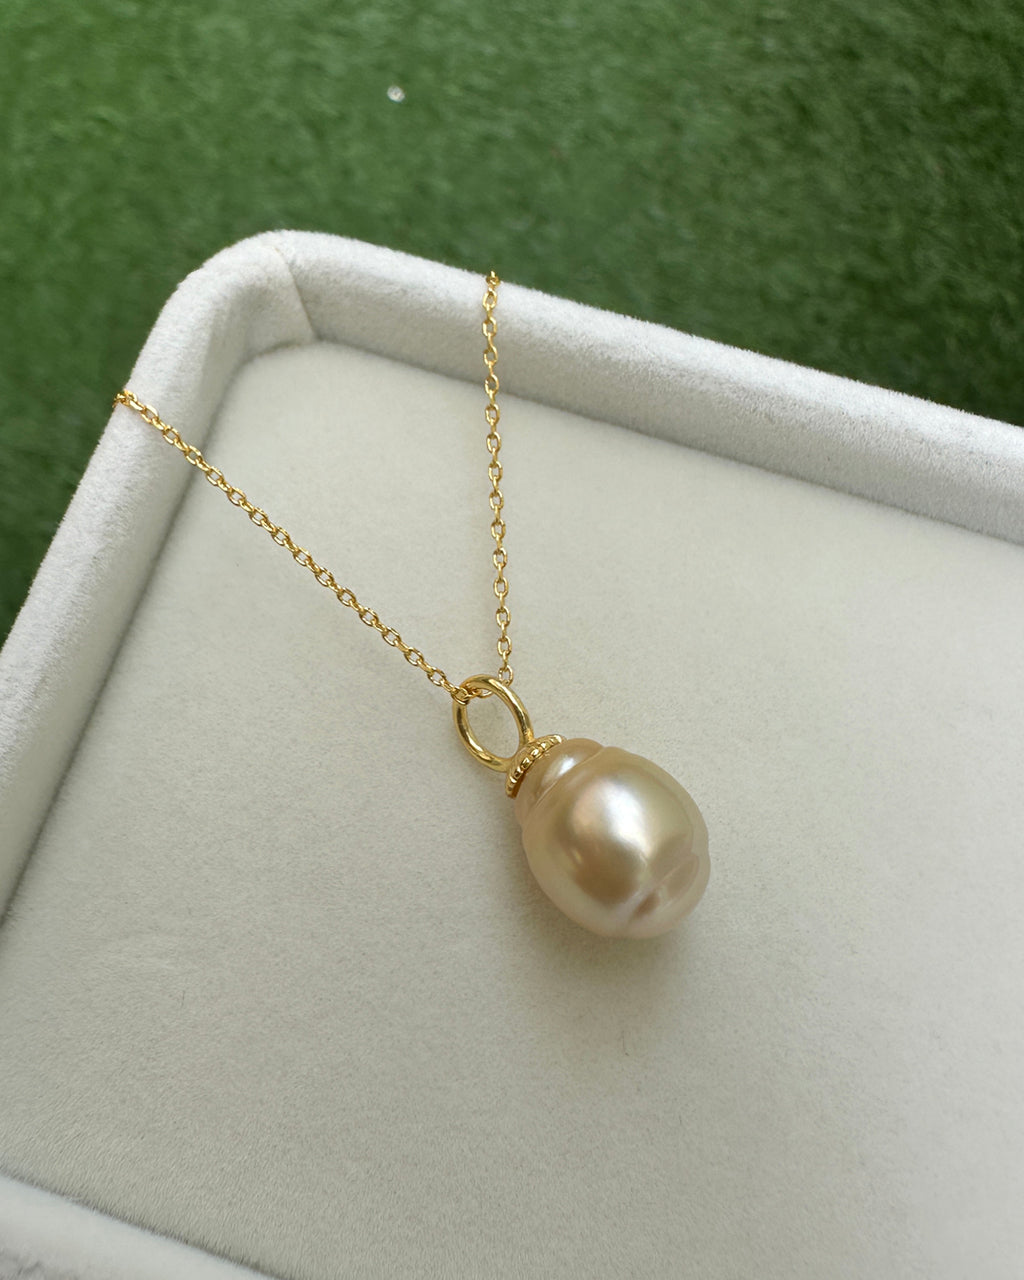 South Sea Pearl Pendant Necklace, 11mm+ baroque gold pearl necklace